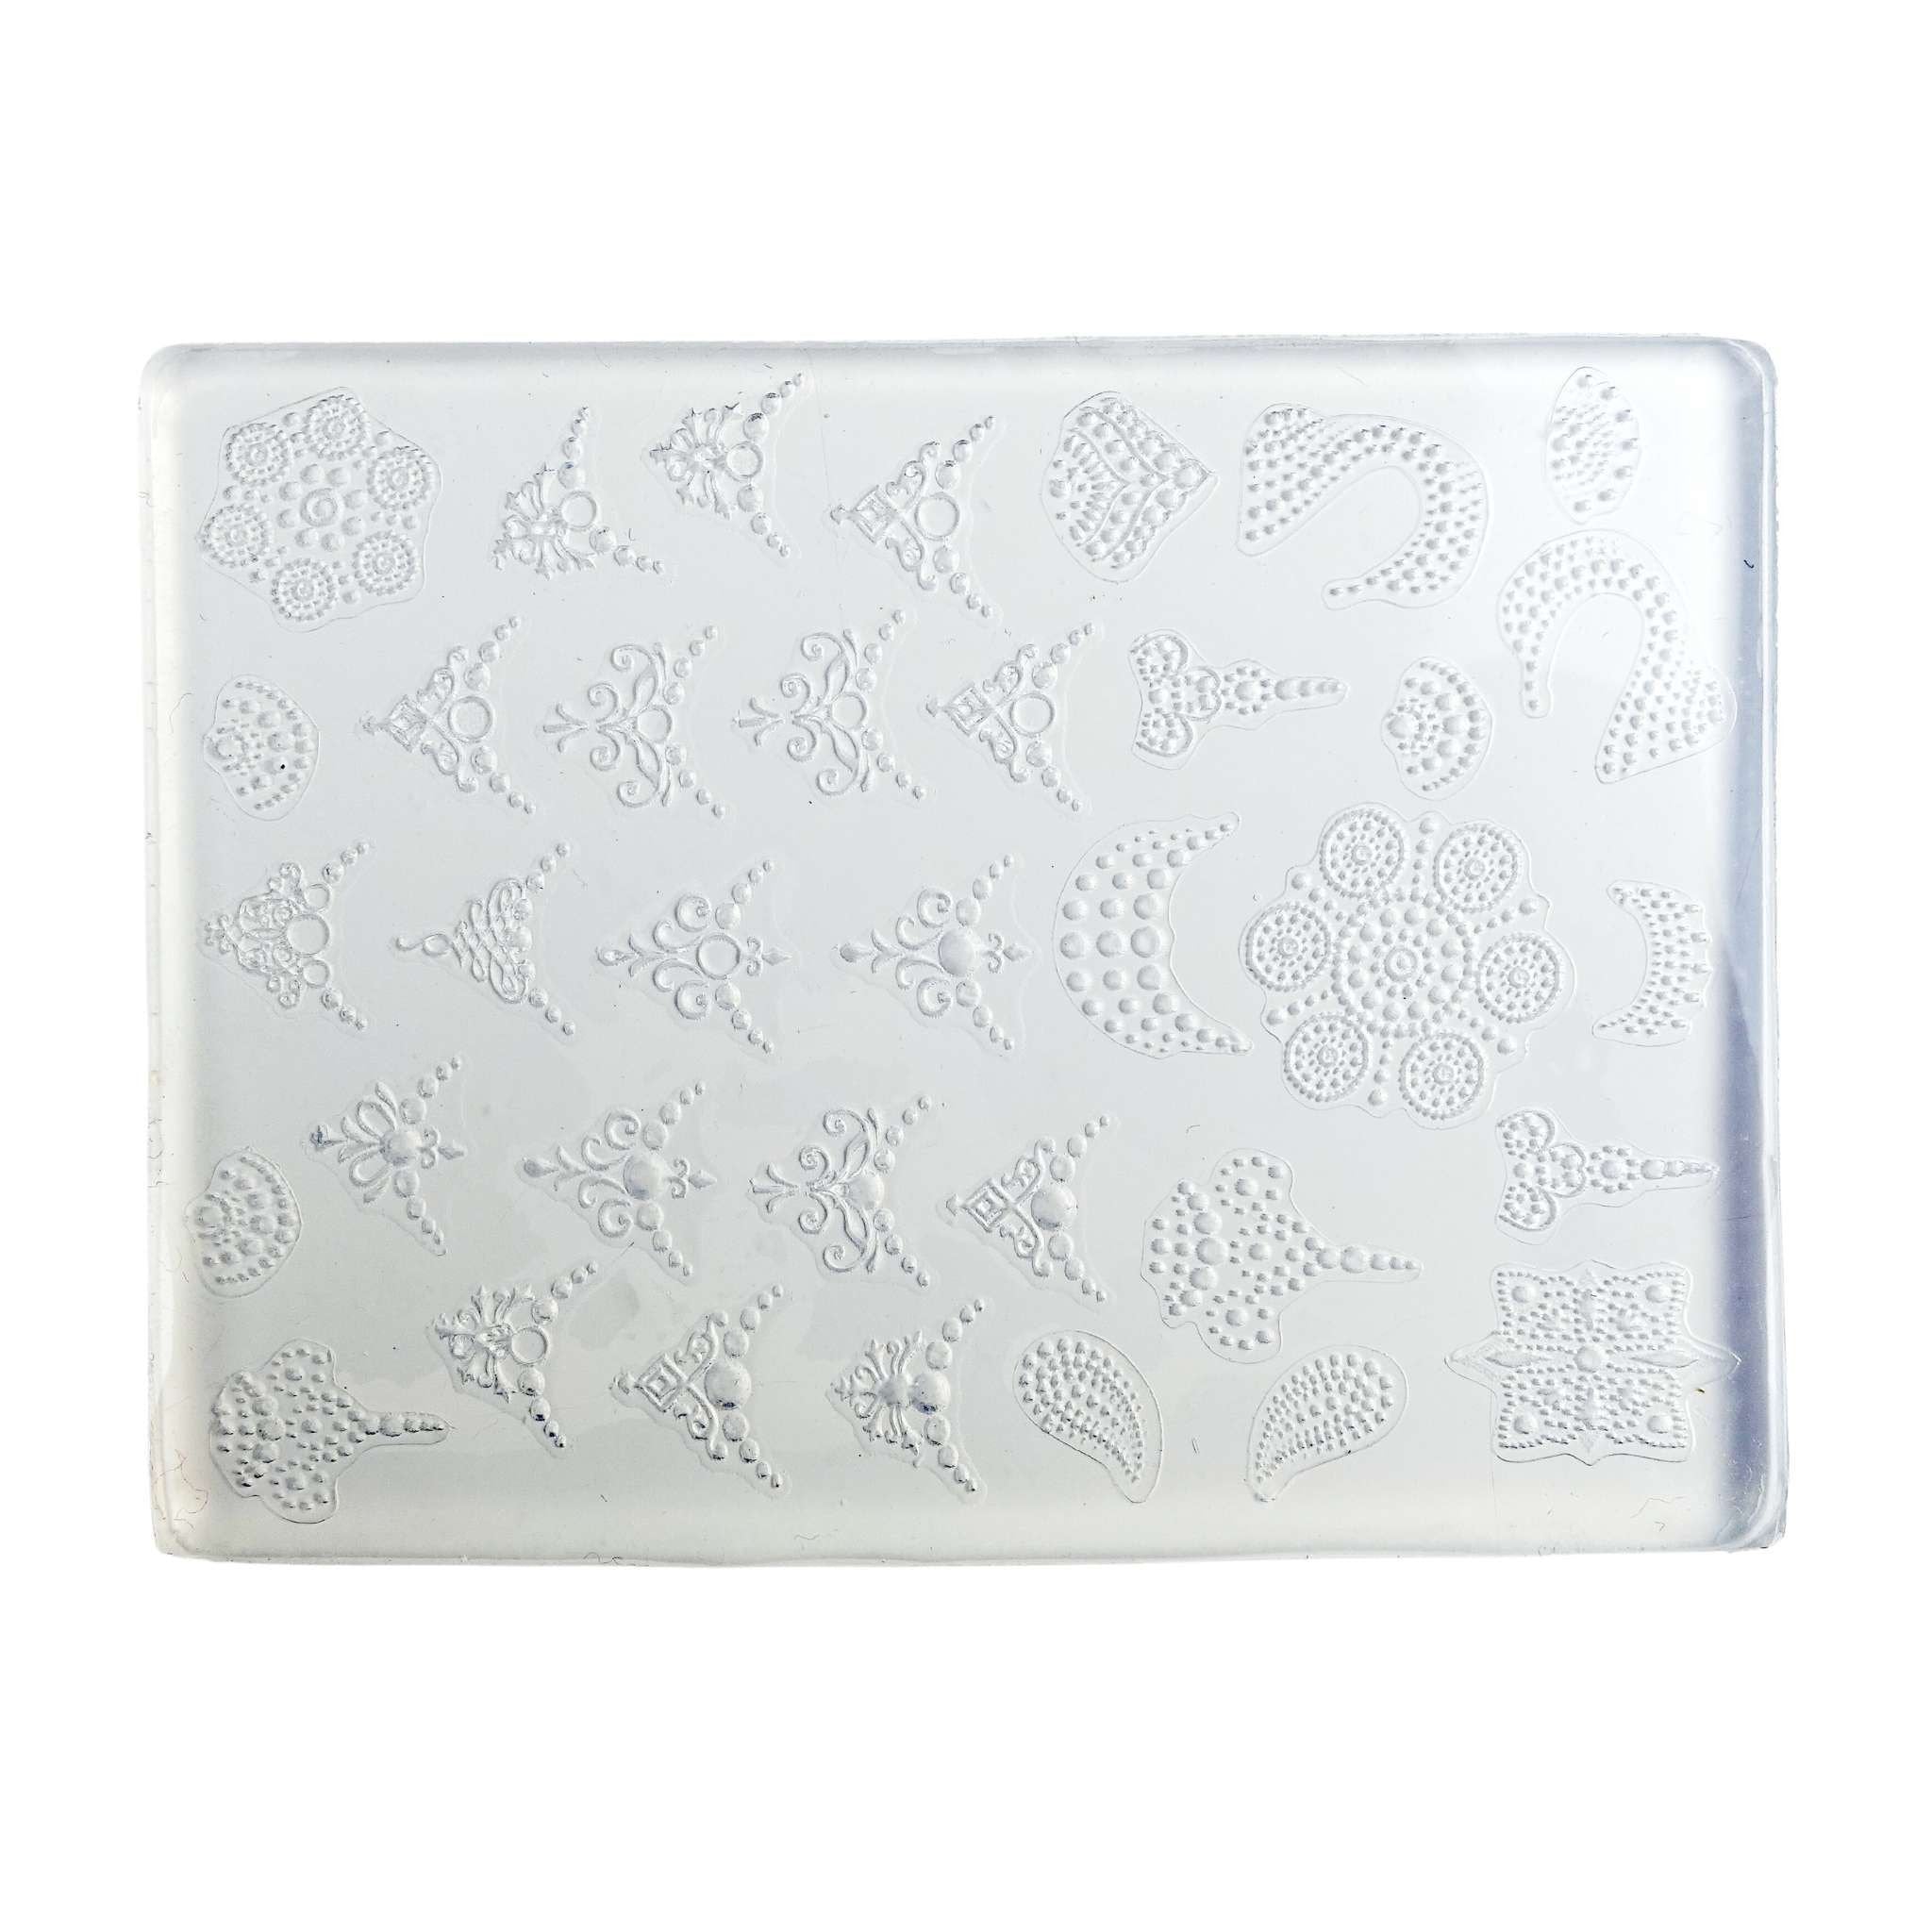 3D Thin Silicone Mold #C-57 - Lace Patterns